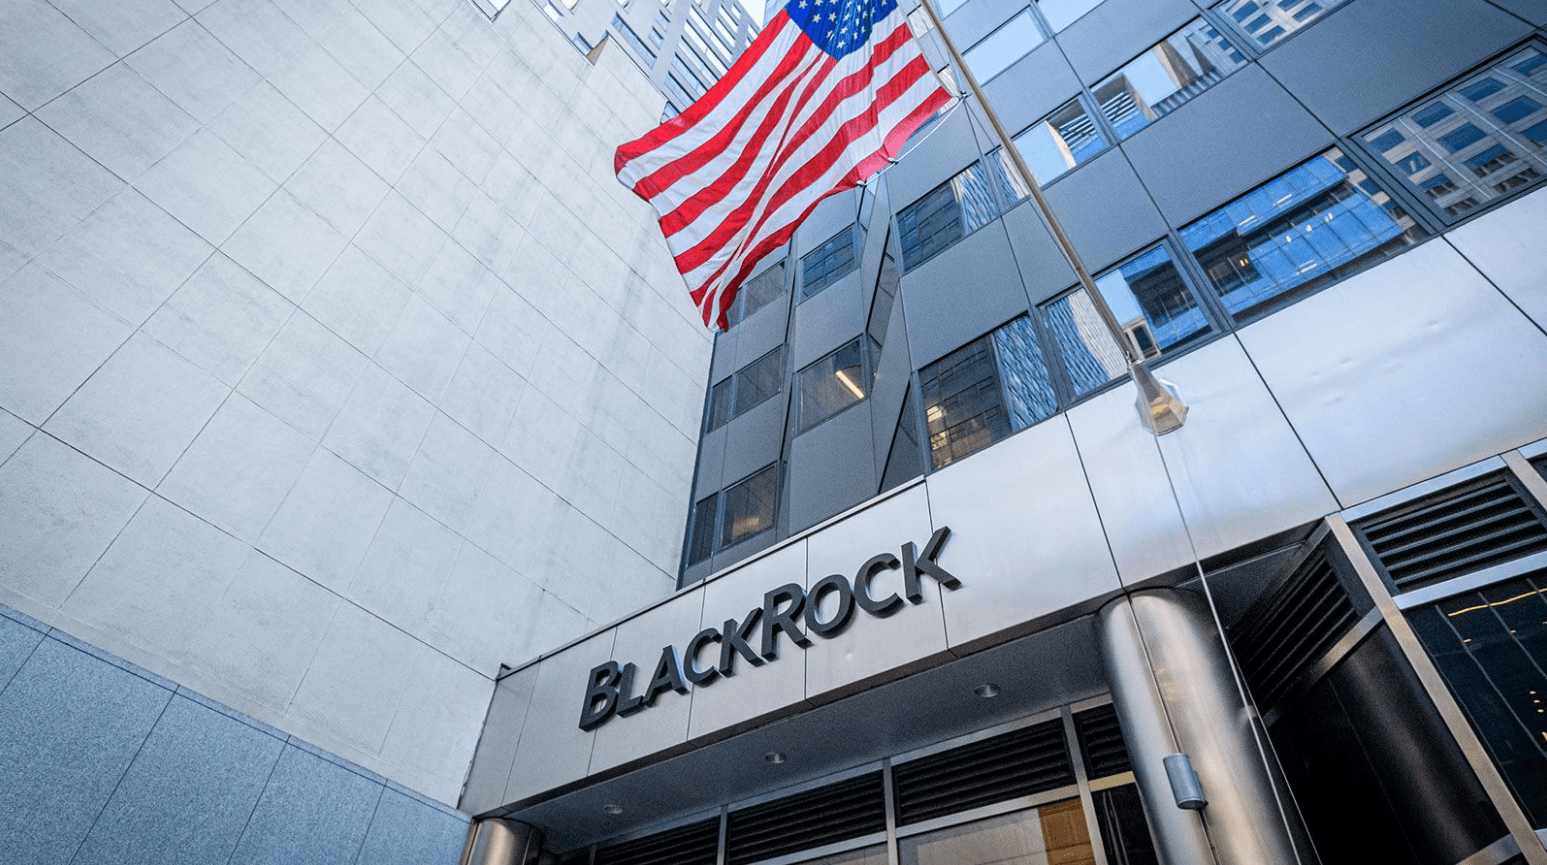 BlackRock company logo displayed on headquarters building, emphasizing the role  in the digital currency landscape.